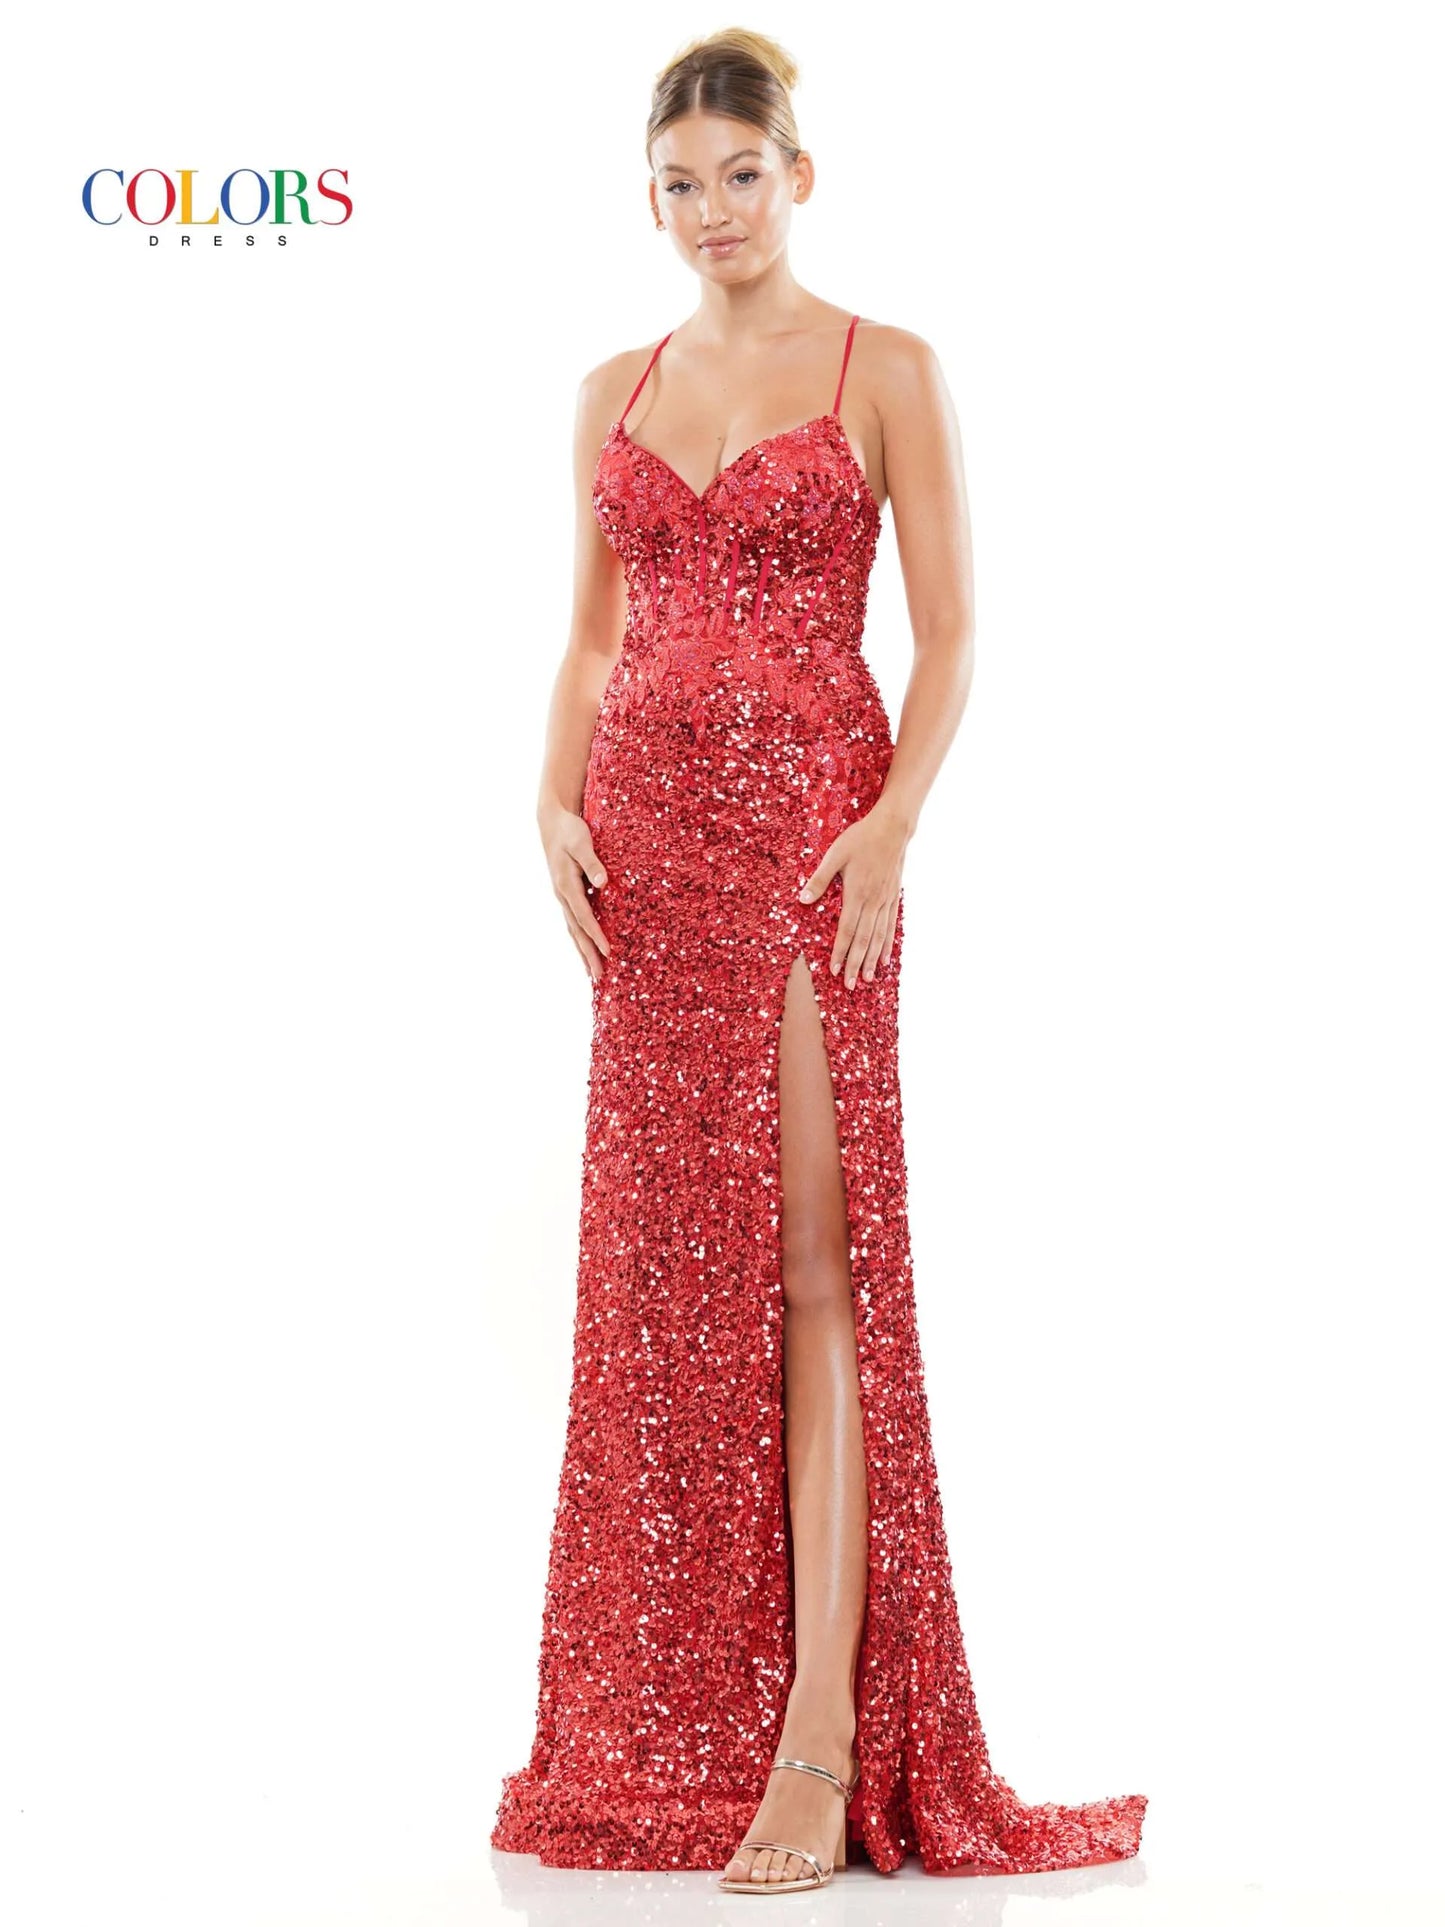 Look your best in this elegant Colors Dress 3299 Long Prom Dress. Featuring a fitted sequin lace bodice with a backless corset, a long, fitted skirt with a side slit, and an intricate lace design. Make a statement in this beautiful gown. Prom, Pageant or any Special Occasion!  Sizes: 0-20  Colors: Red, Blue, Green, White